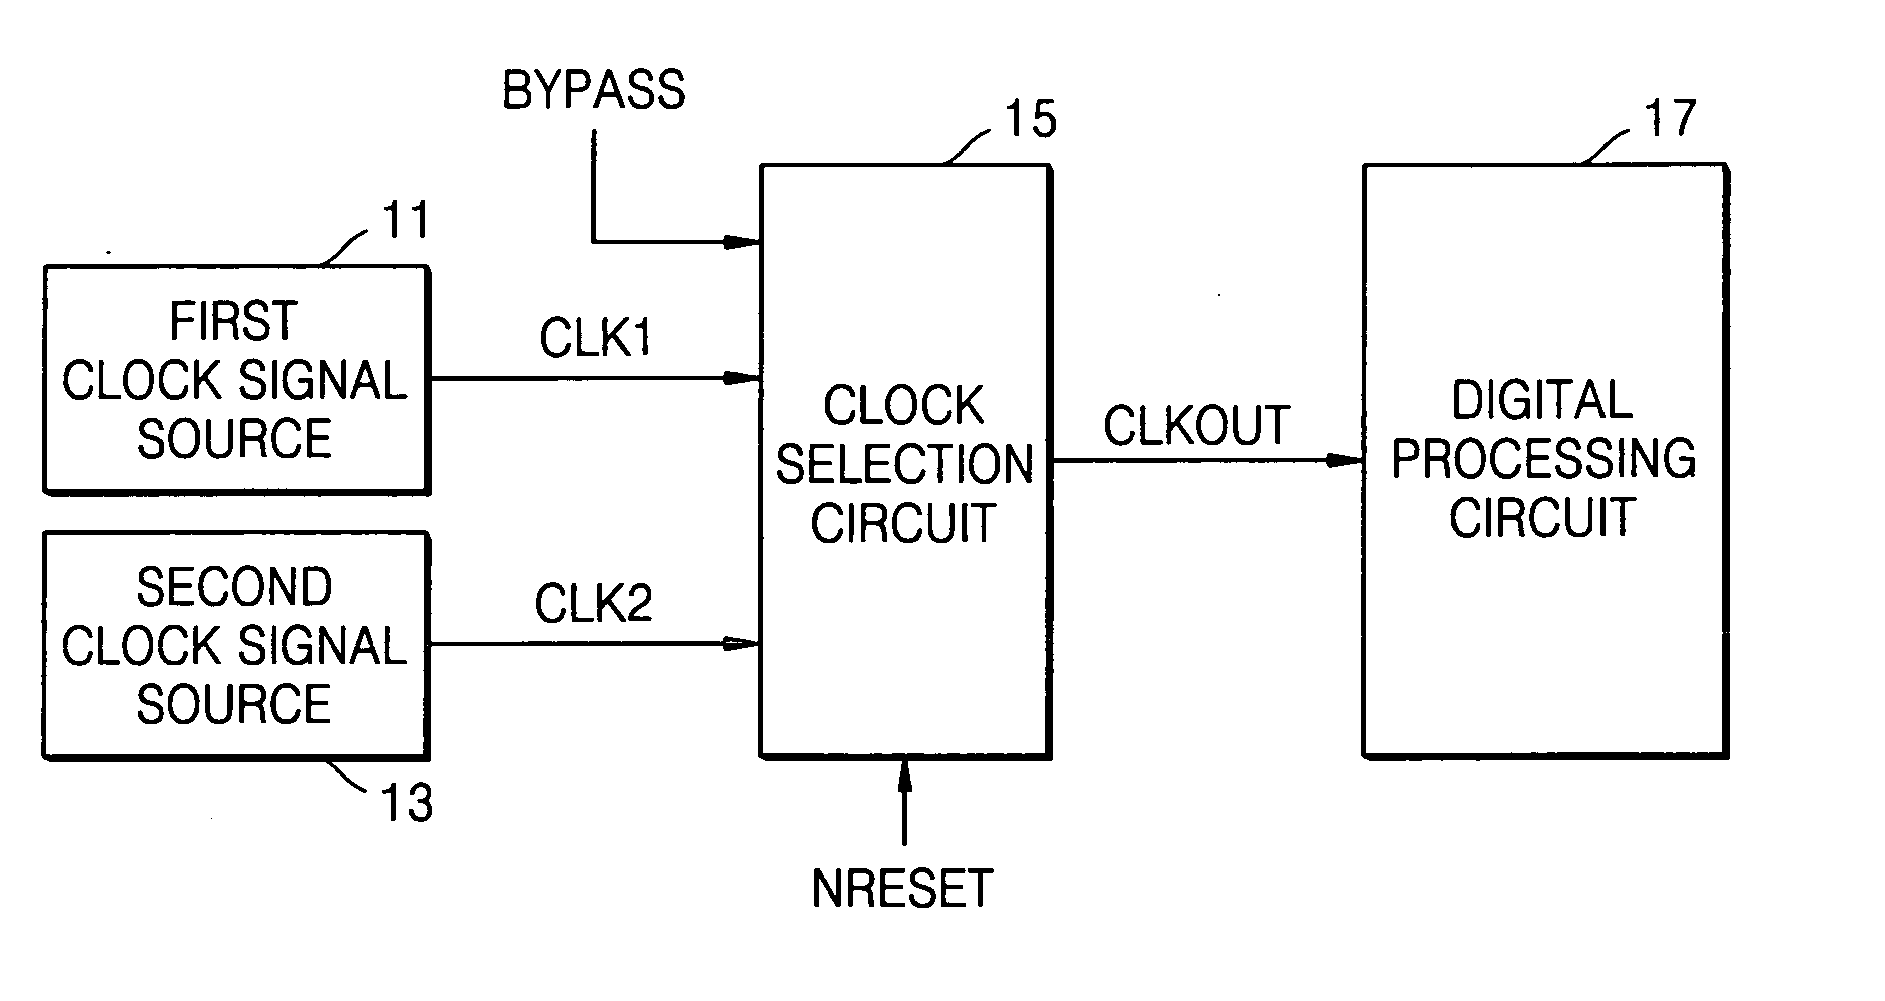 Clock selection circuit and digital processing system for reducing glitches